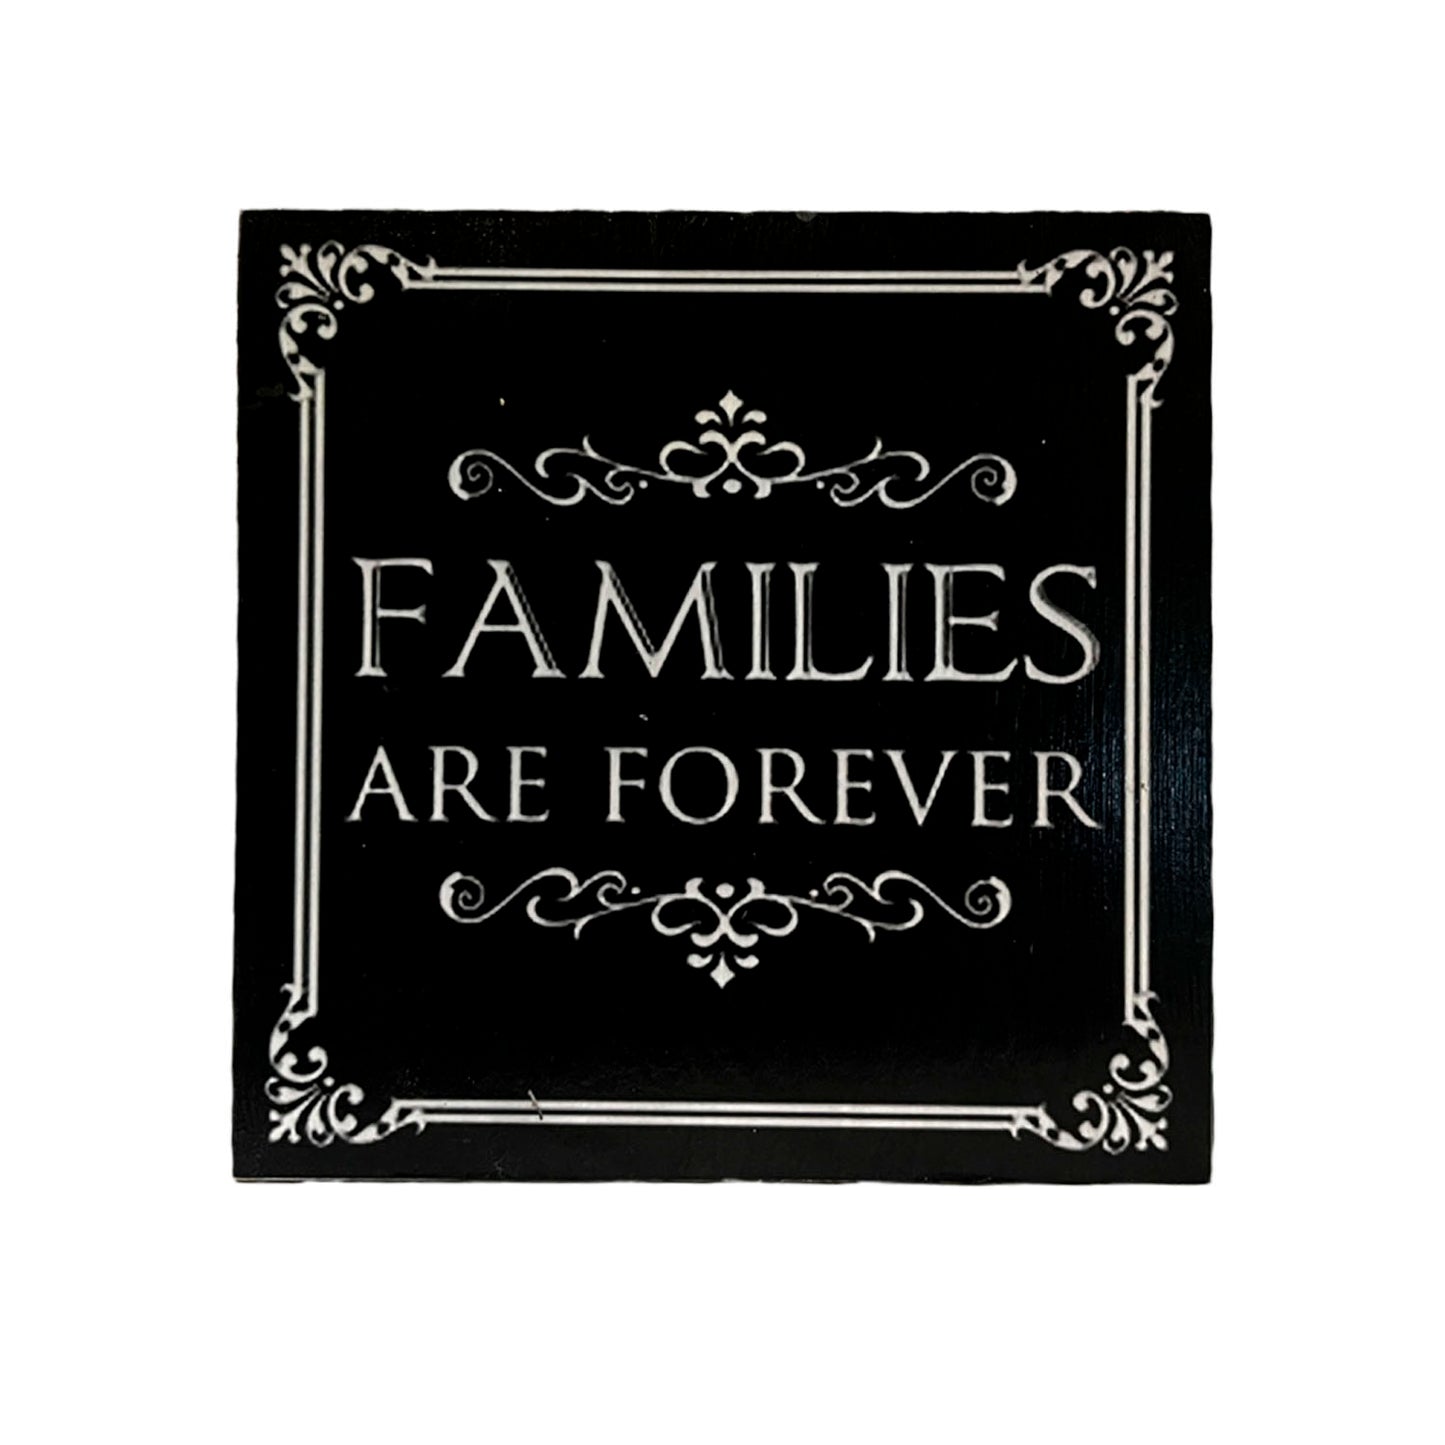 Afiche "Families Forever"